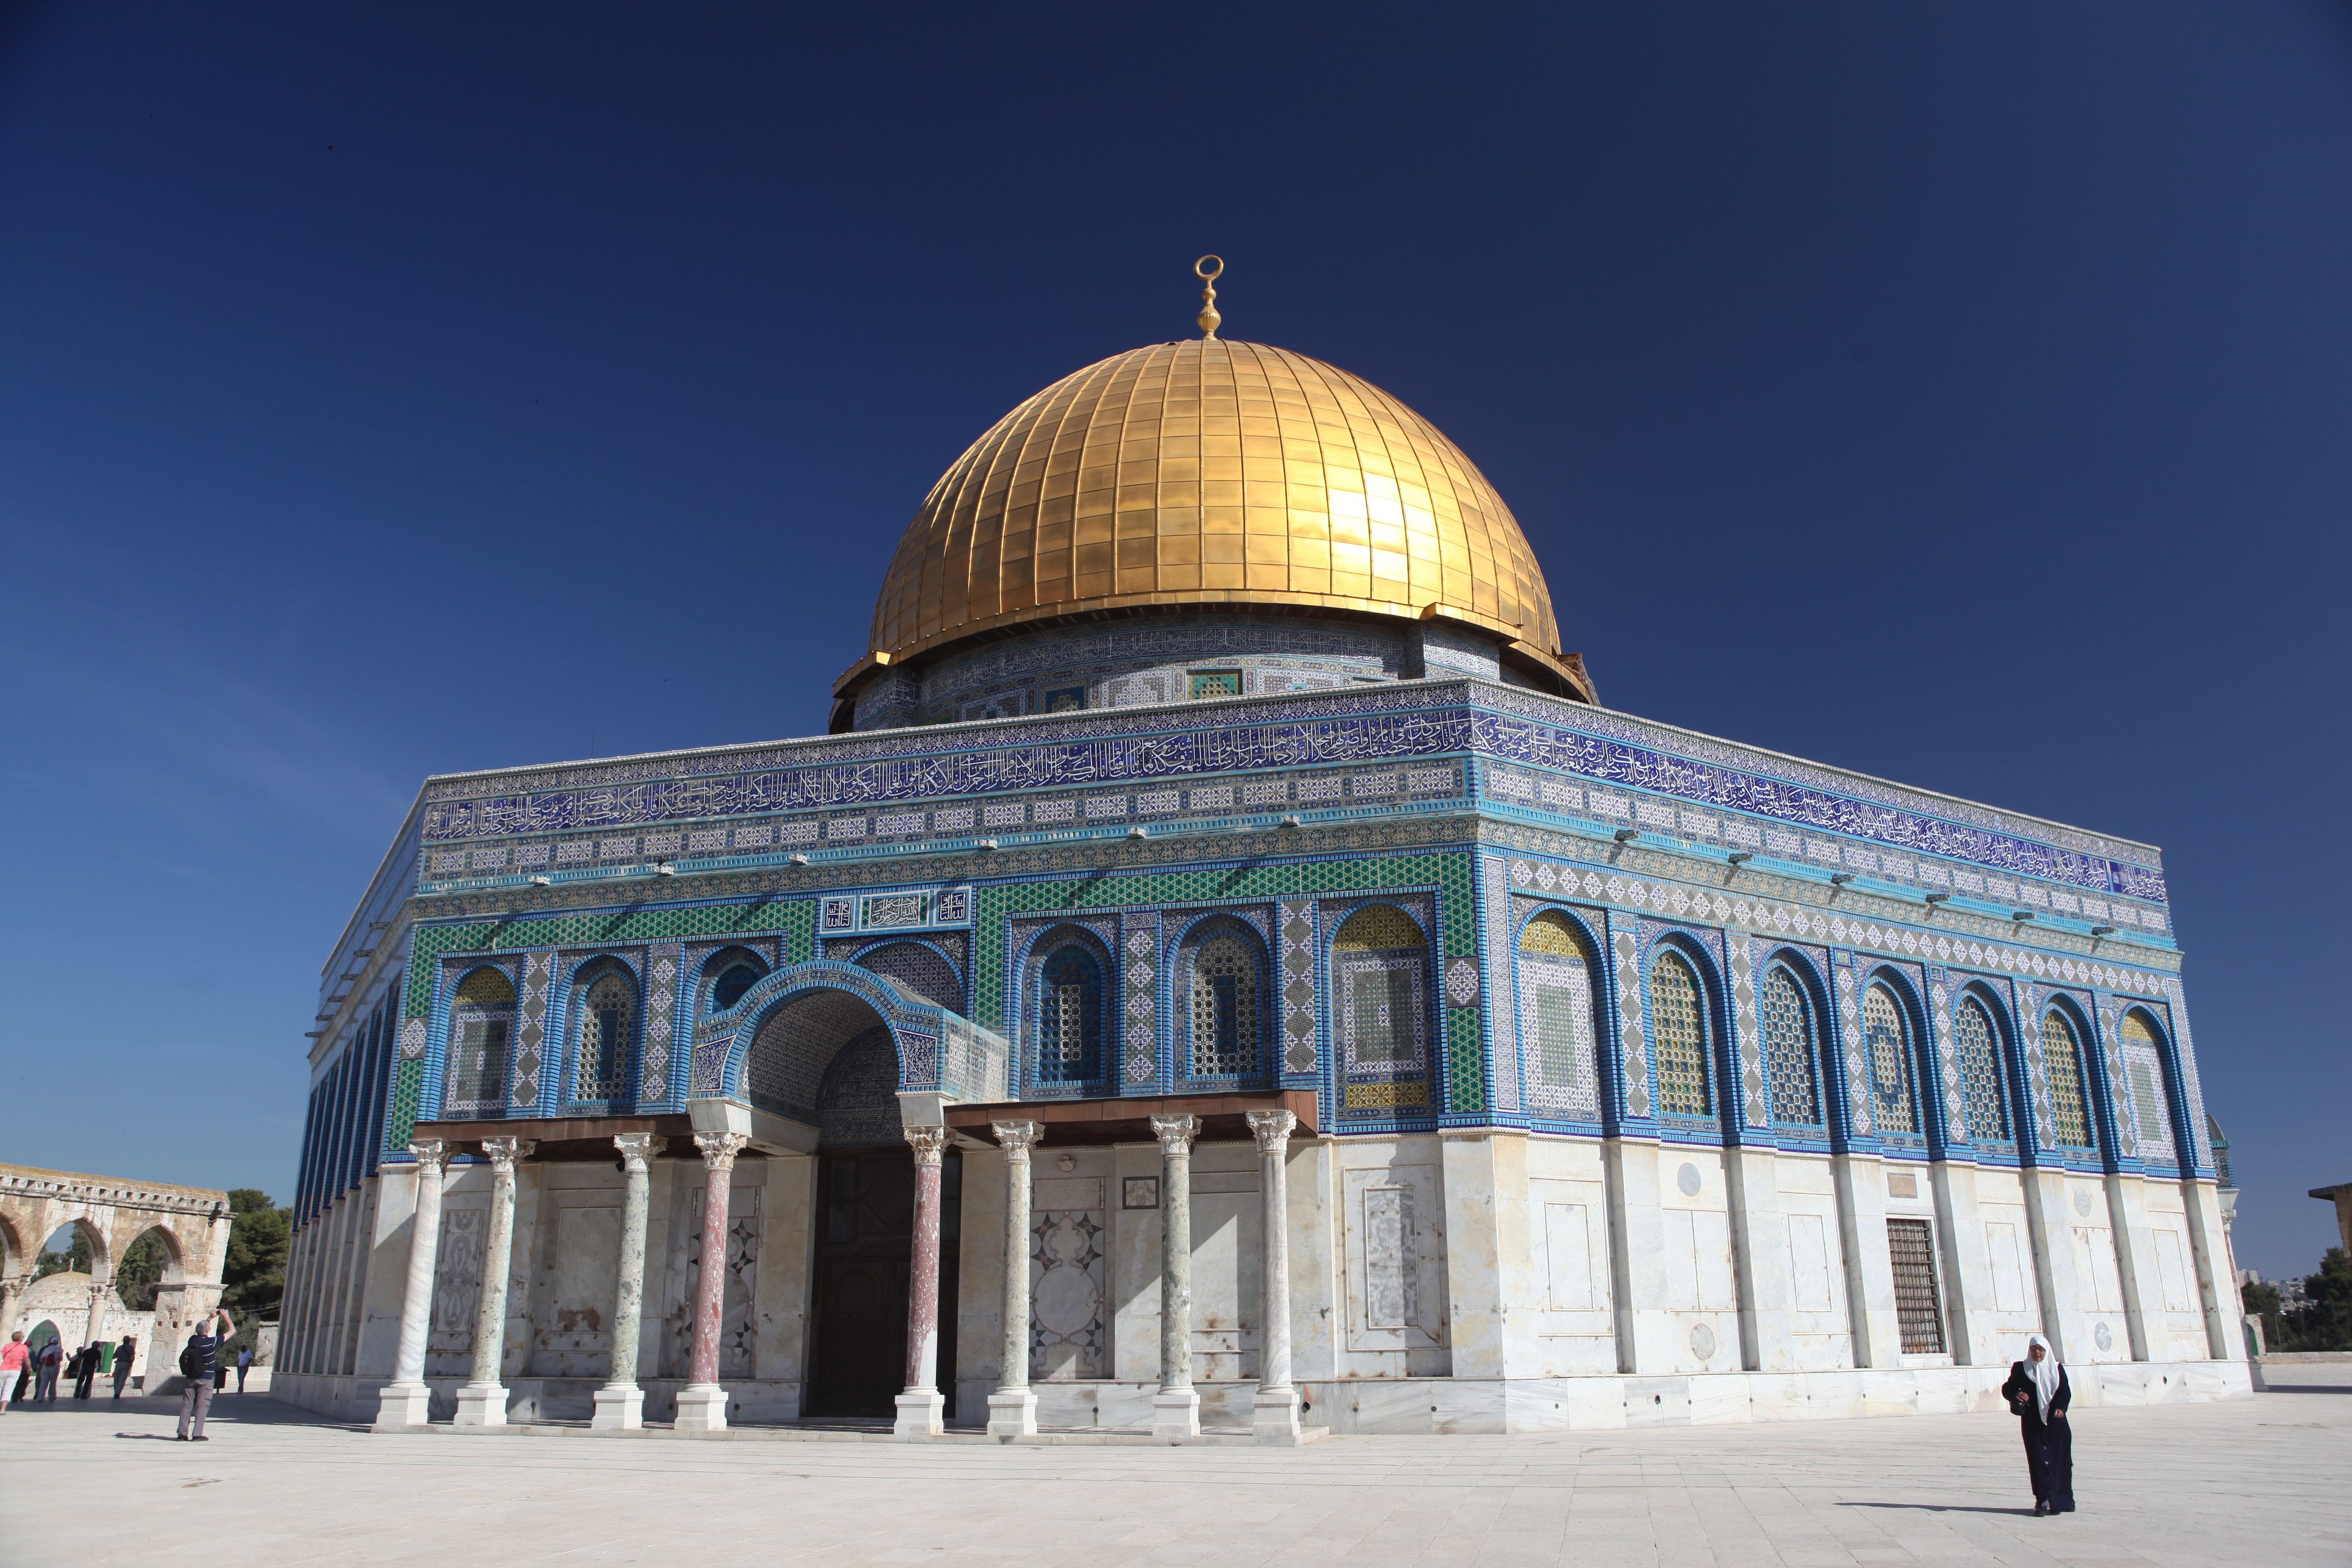 The Dome of the Rock on the Temple Mount in Jerusalem.